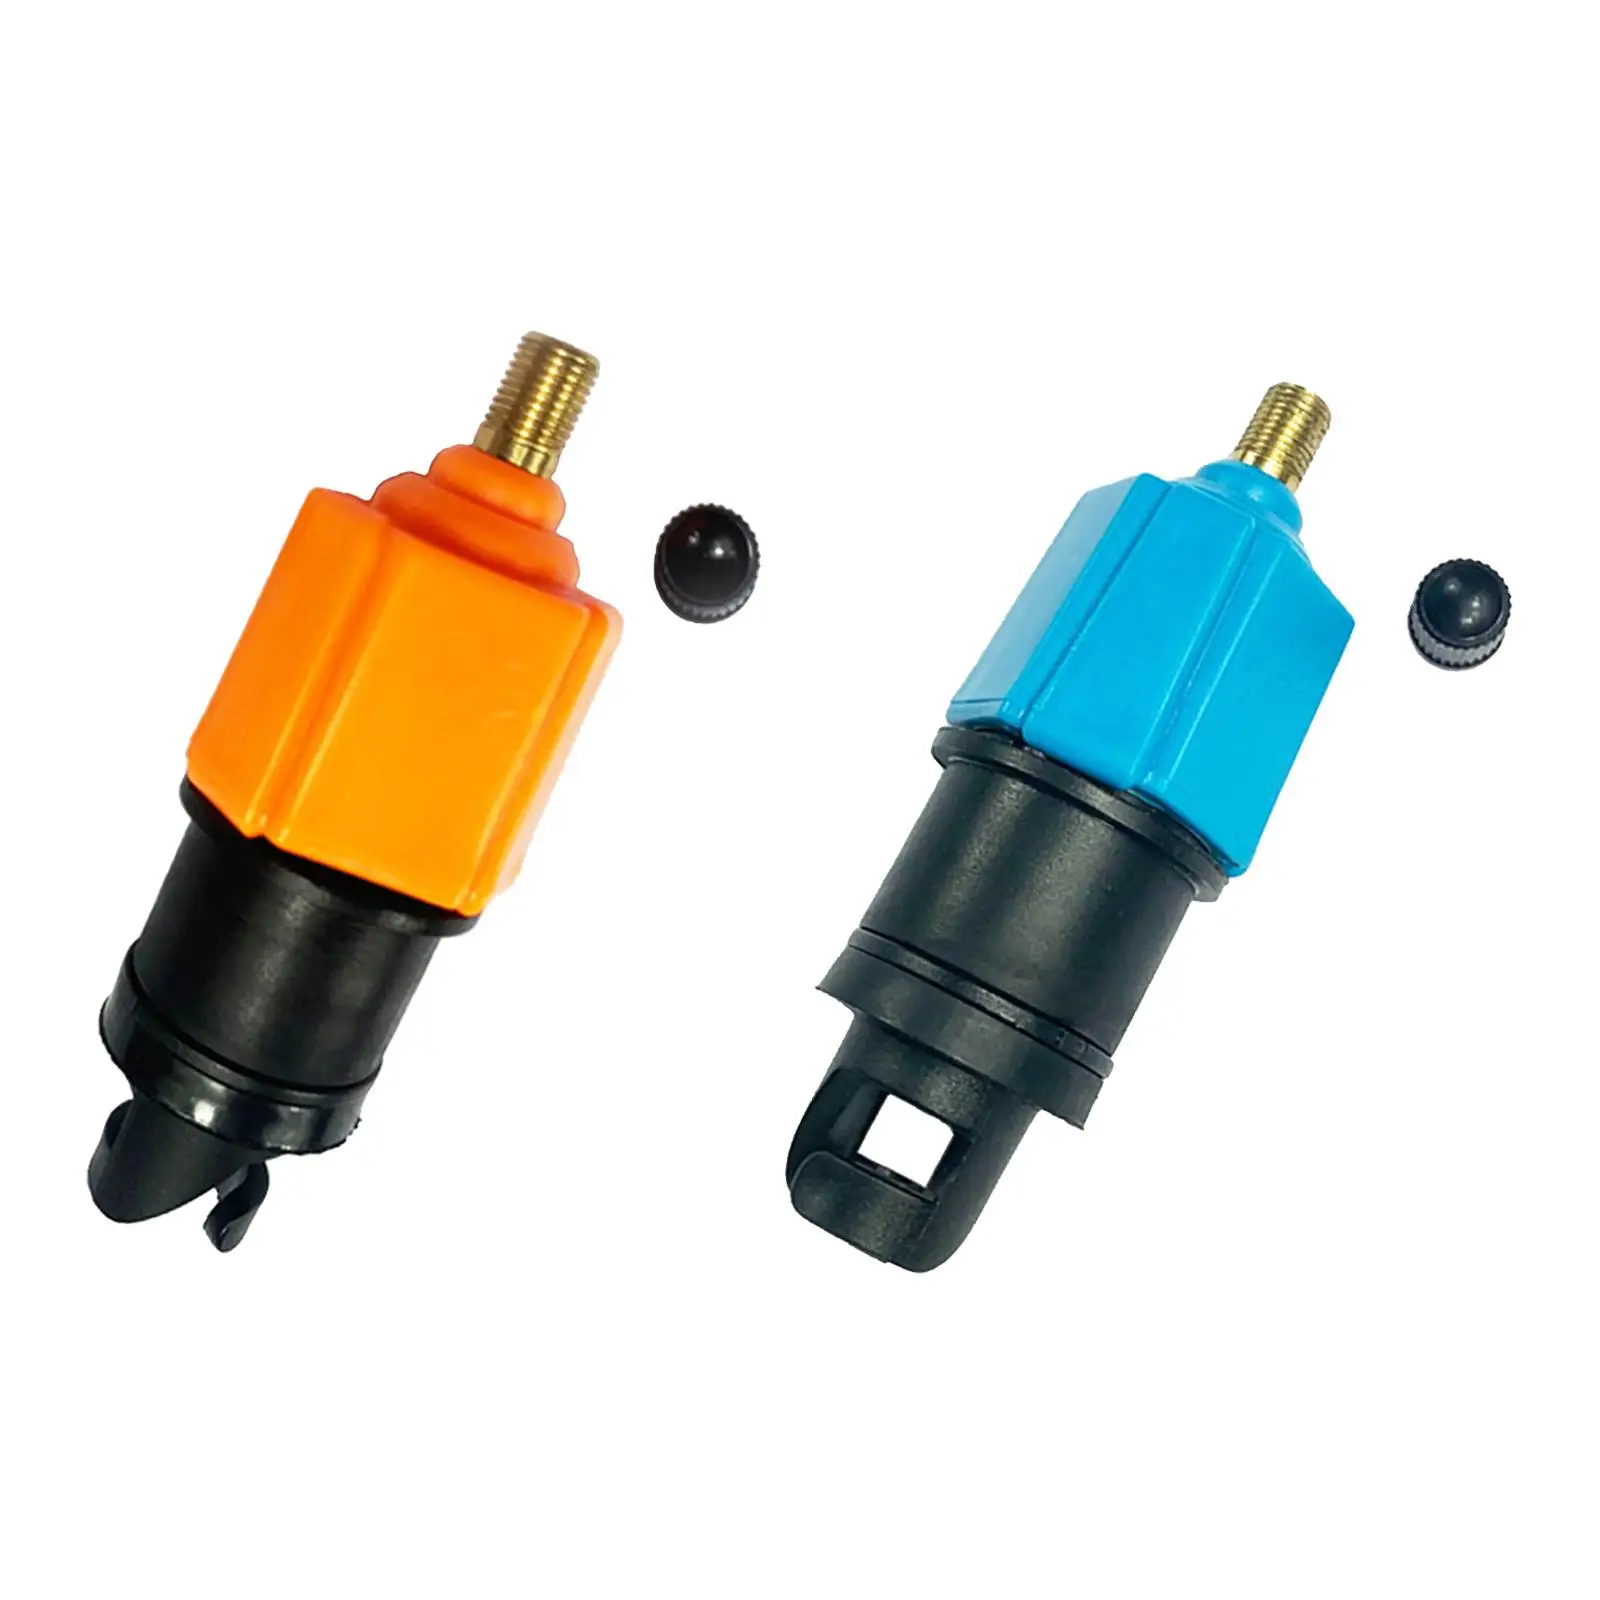 Air Valve Adaptor Wear-Resistant Pumping Nozzle for Kayak Boat Accessory